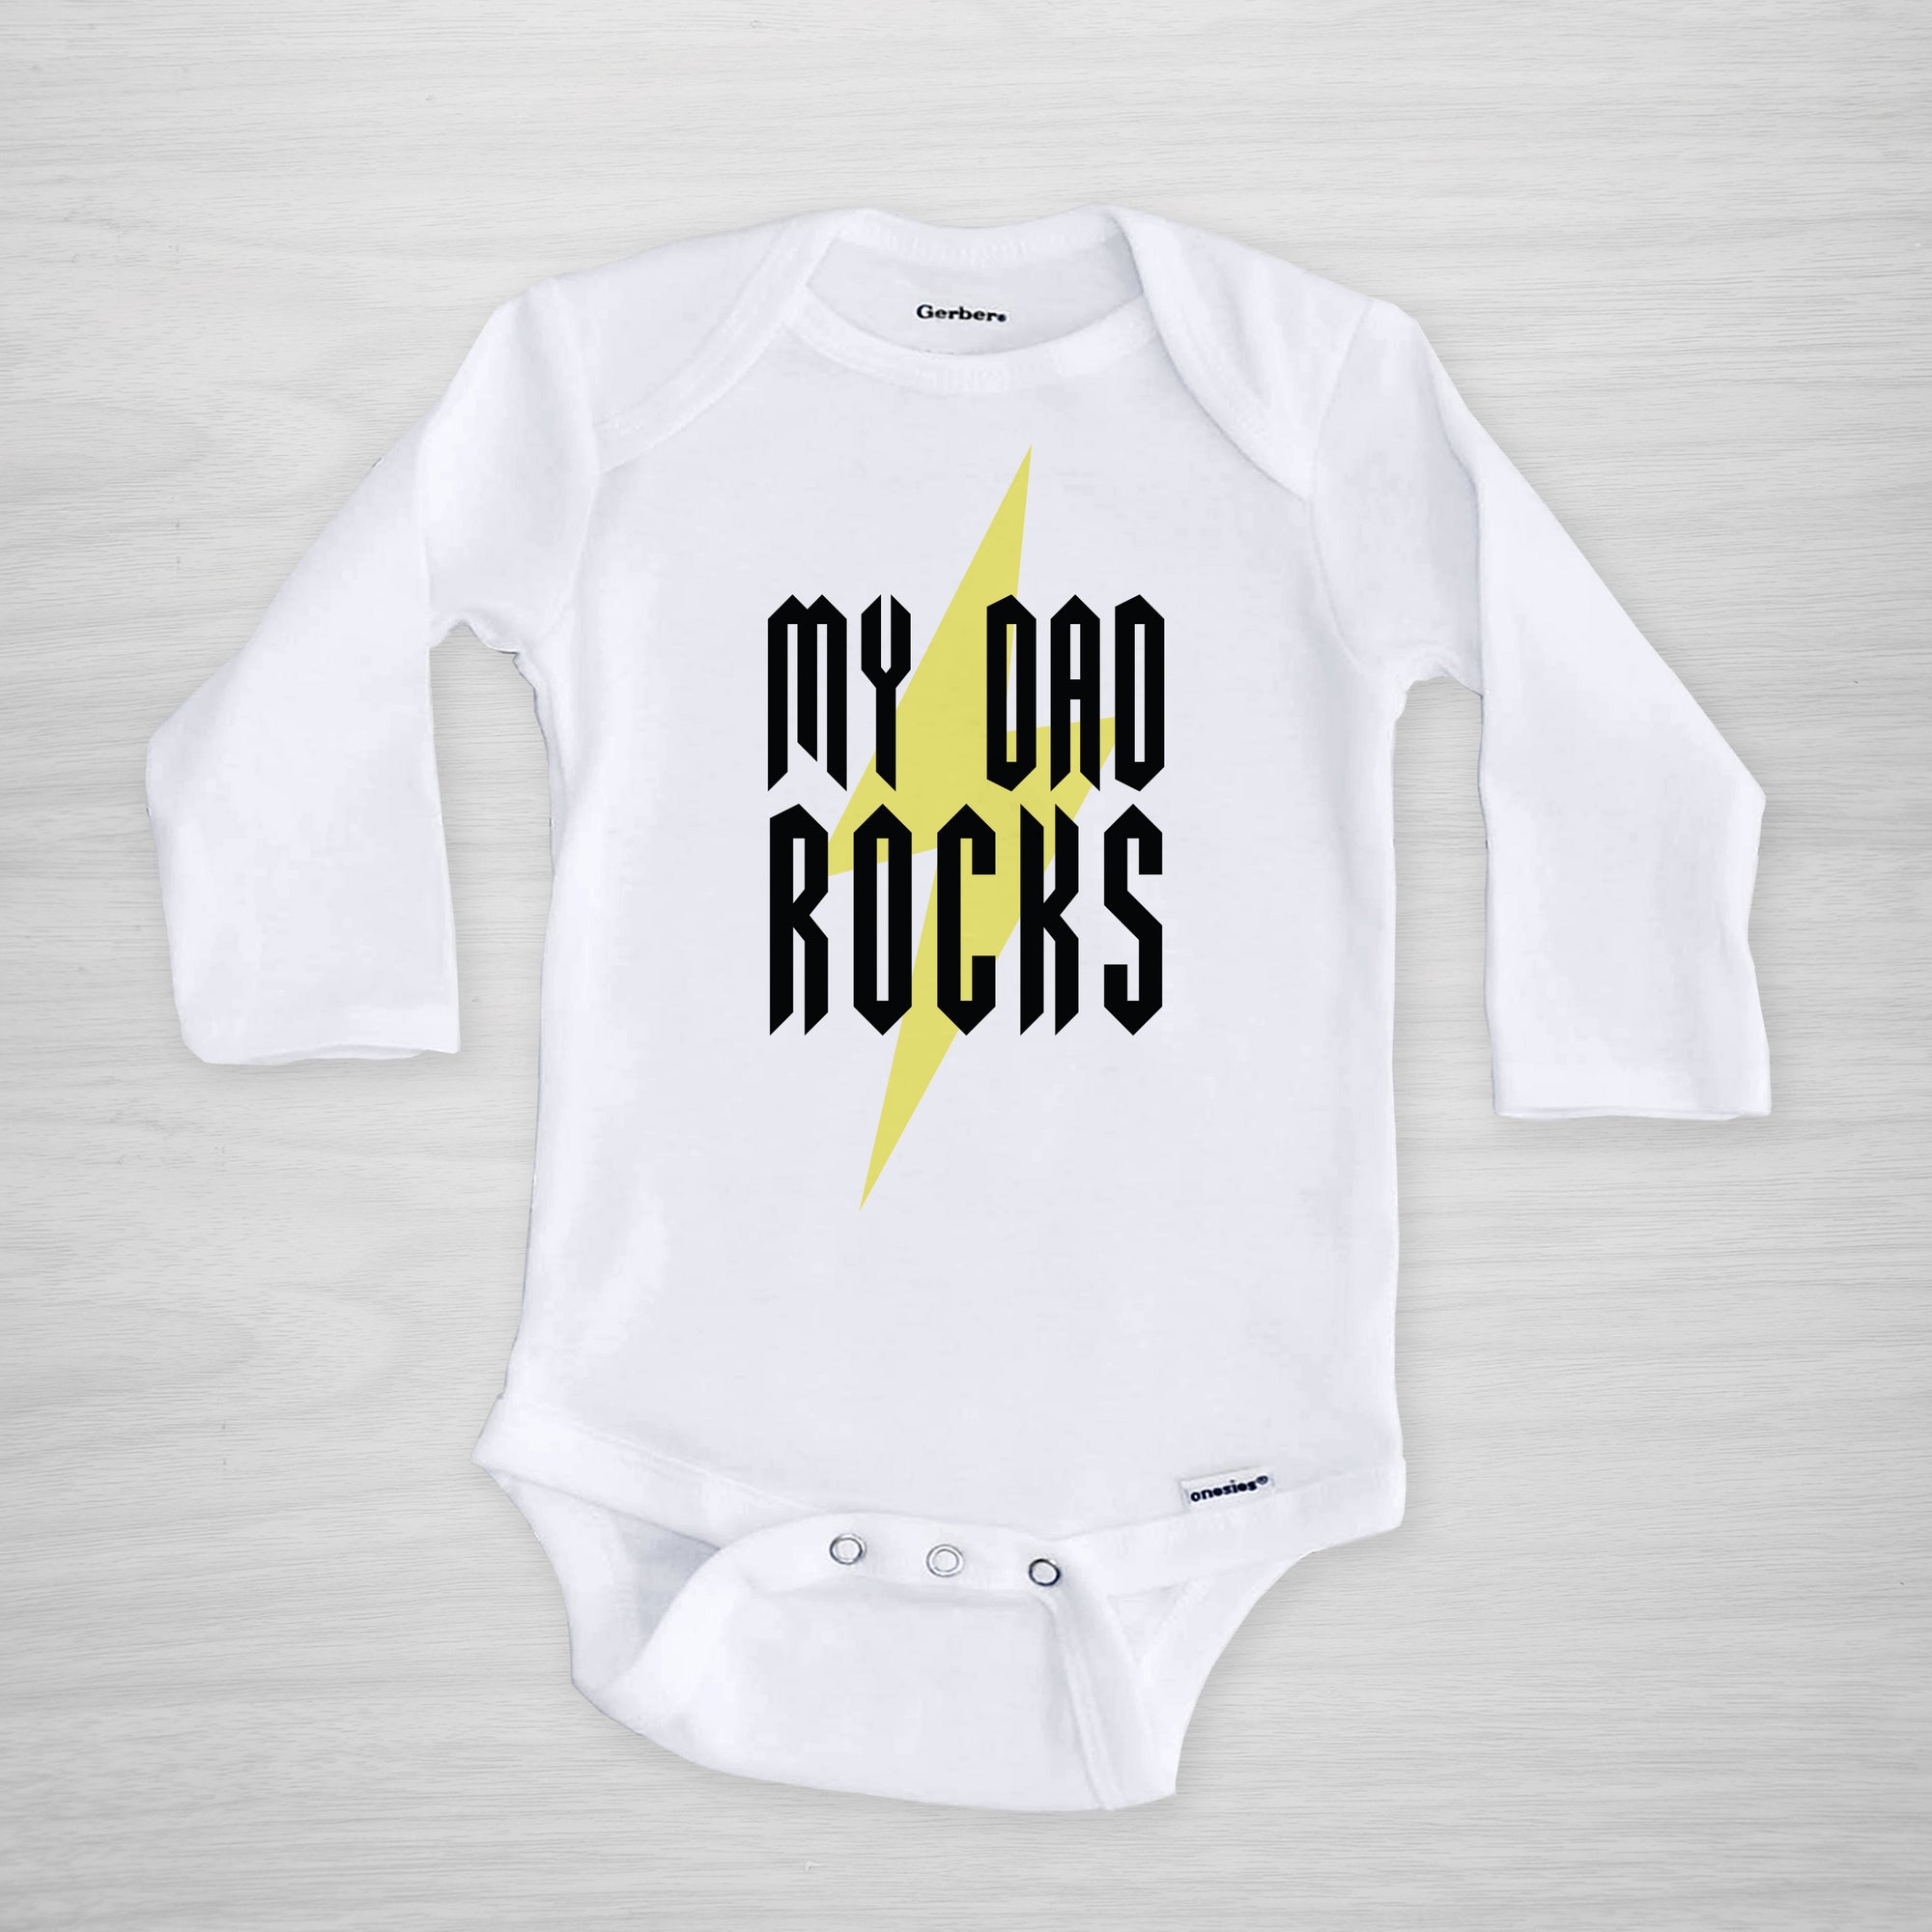 My Dad Rocks onesie, perfect to celebrate your music loving dad on Father's Day, long sleeved